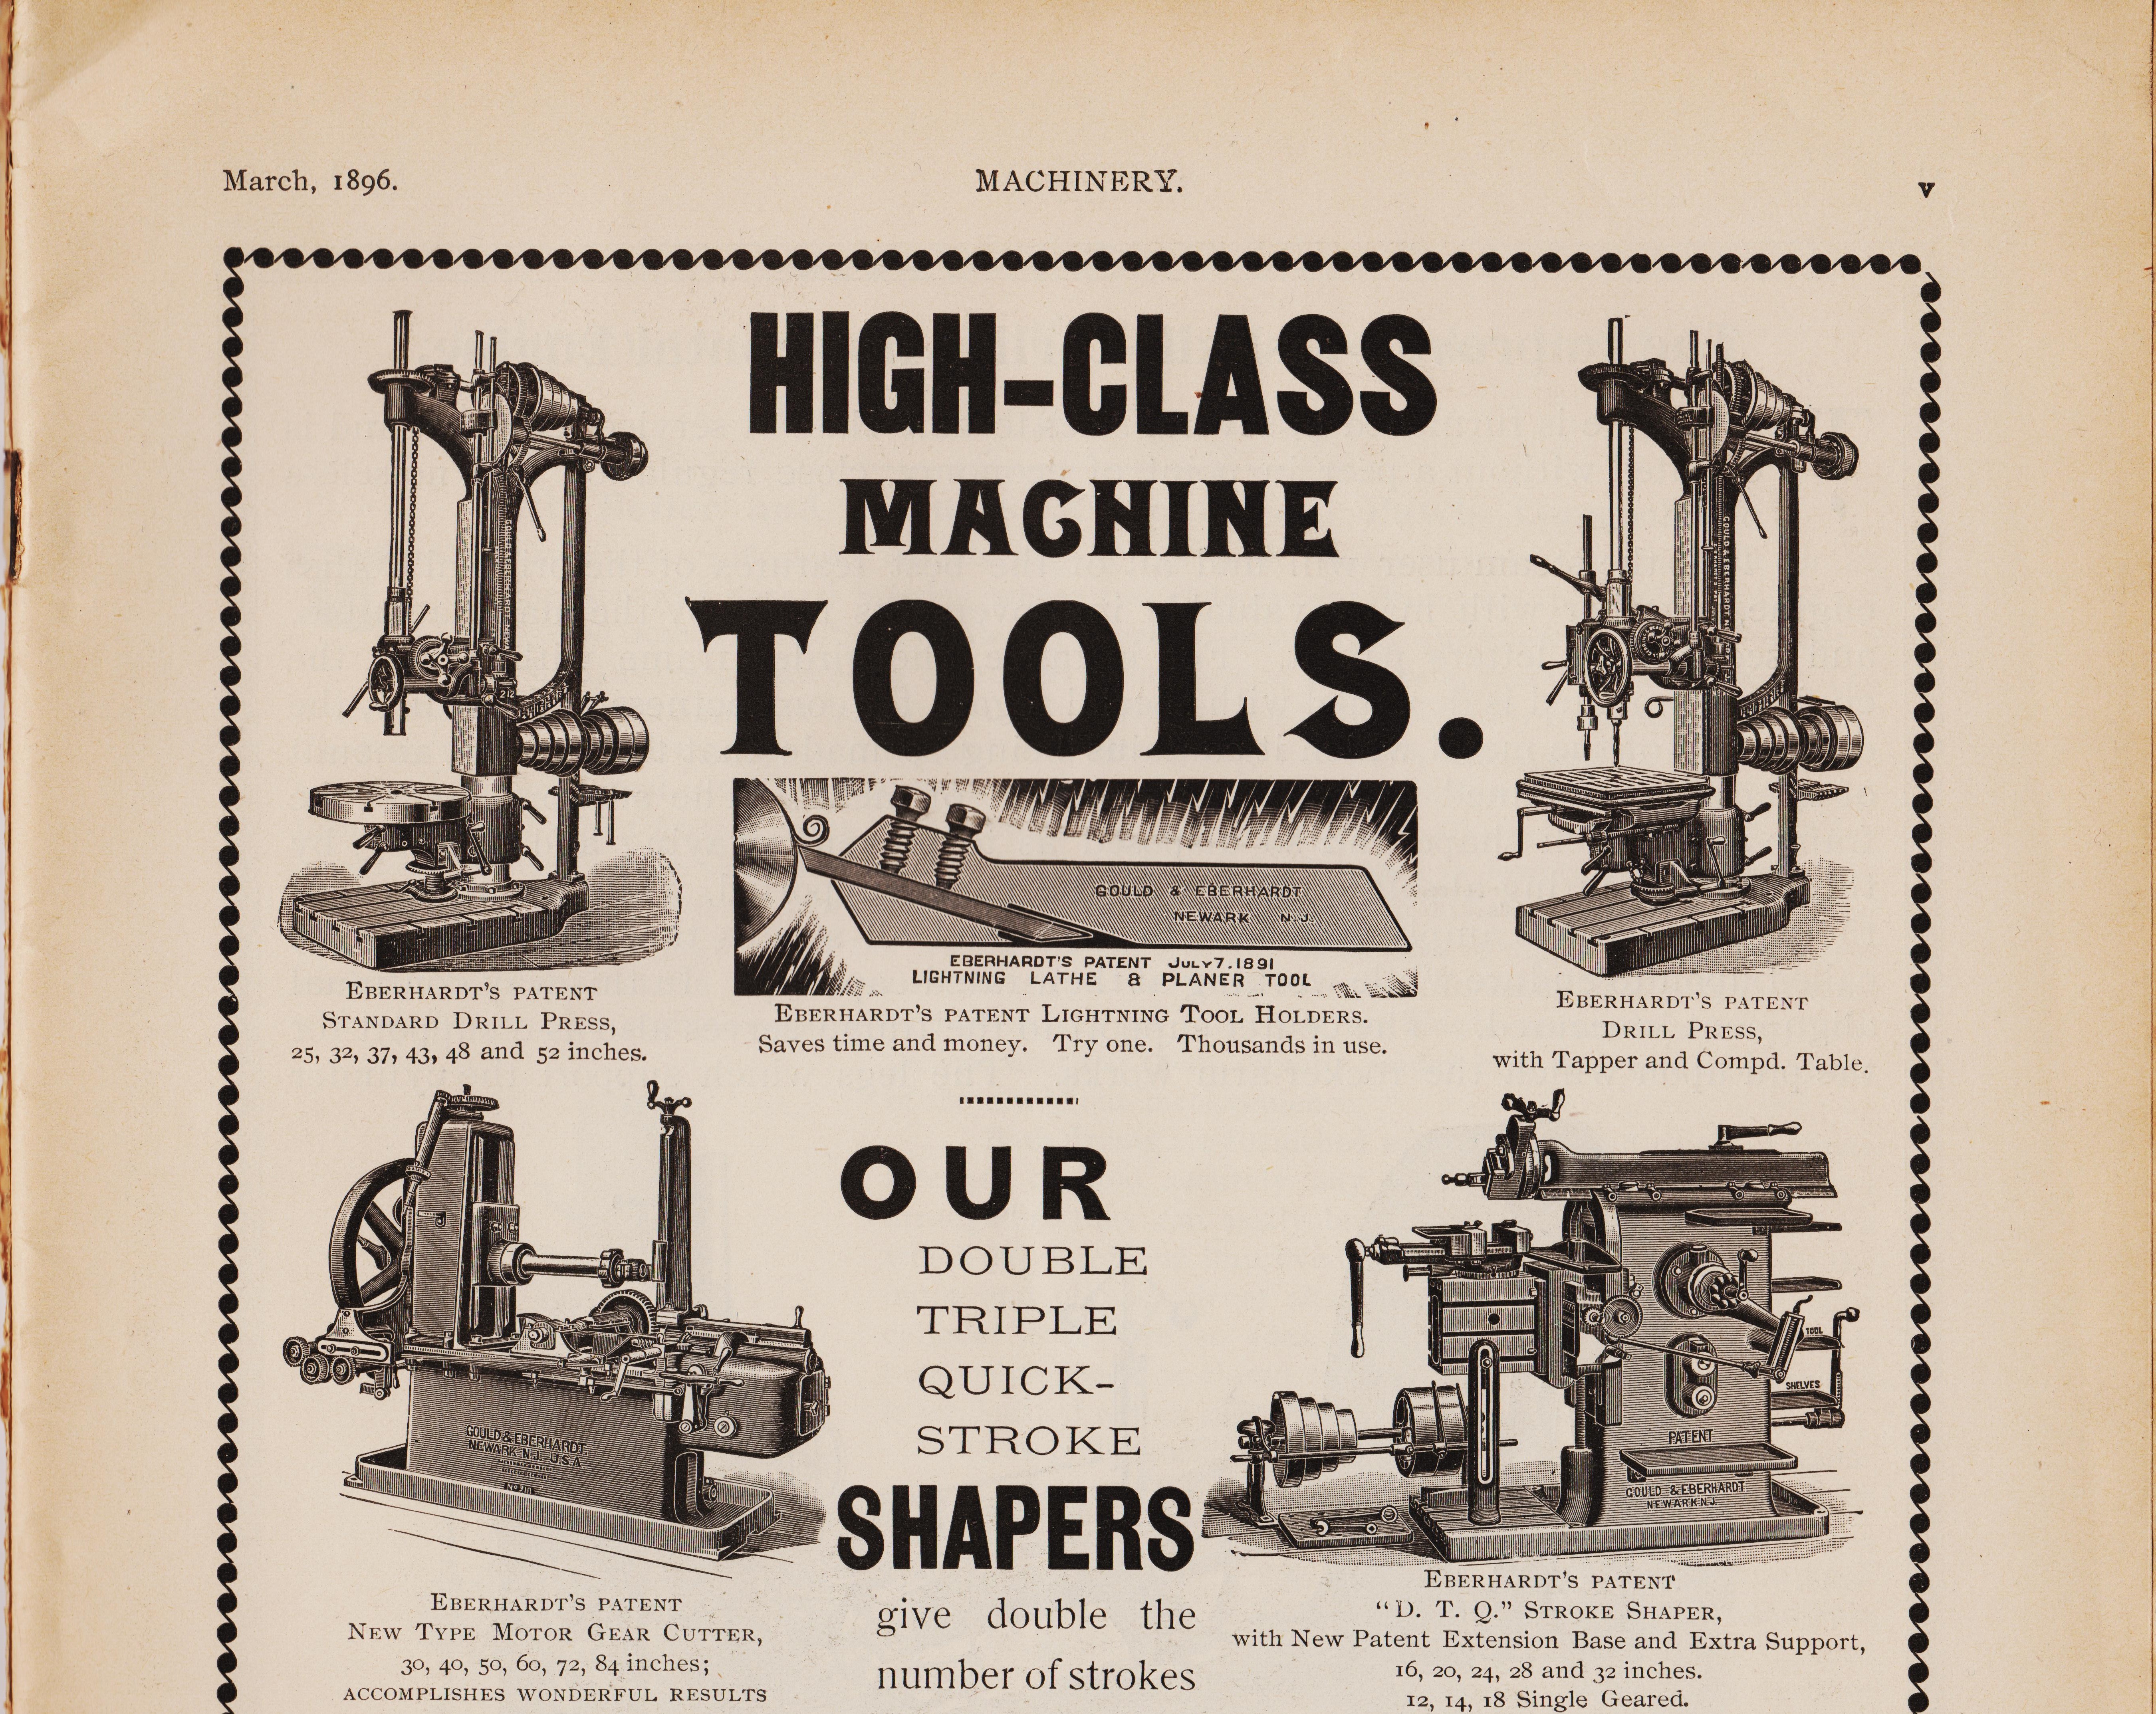 http://antiquemachinery.com/images-2020/Machinery-Magazine-March-1896-vol-2-no-7-page-v-top-high-class-machine-tools-shapers-drill-press-Gear-Cutters-Eberhardt.jpg